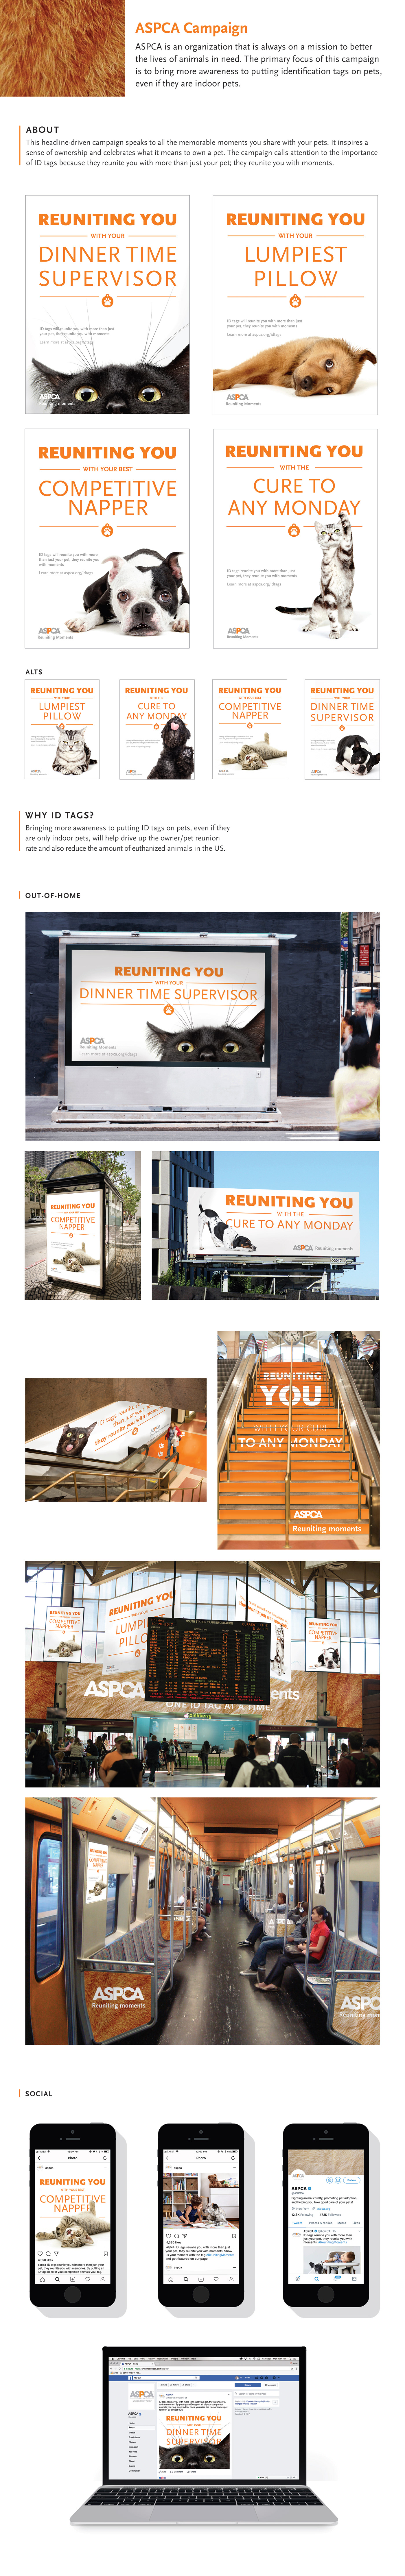 campaign art direction  Advertising  animals headlines shelter awareness